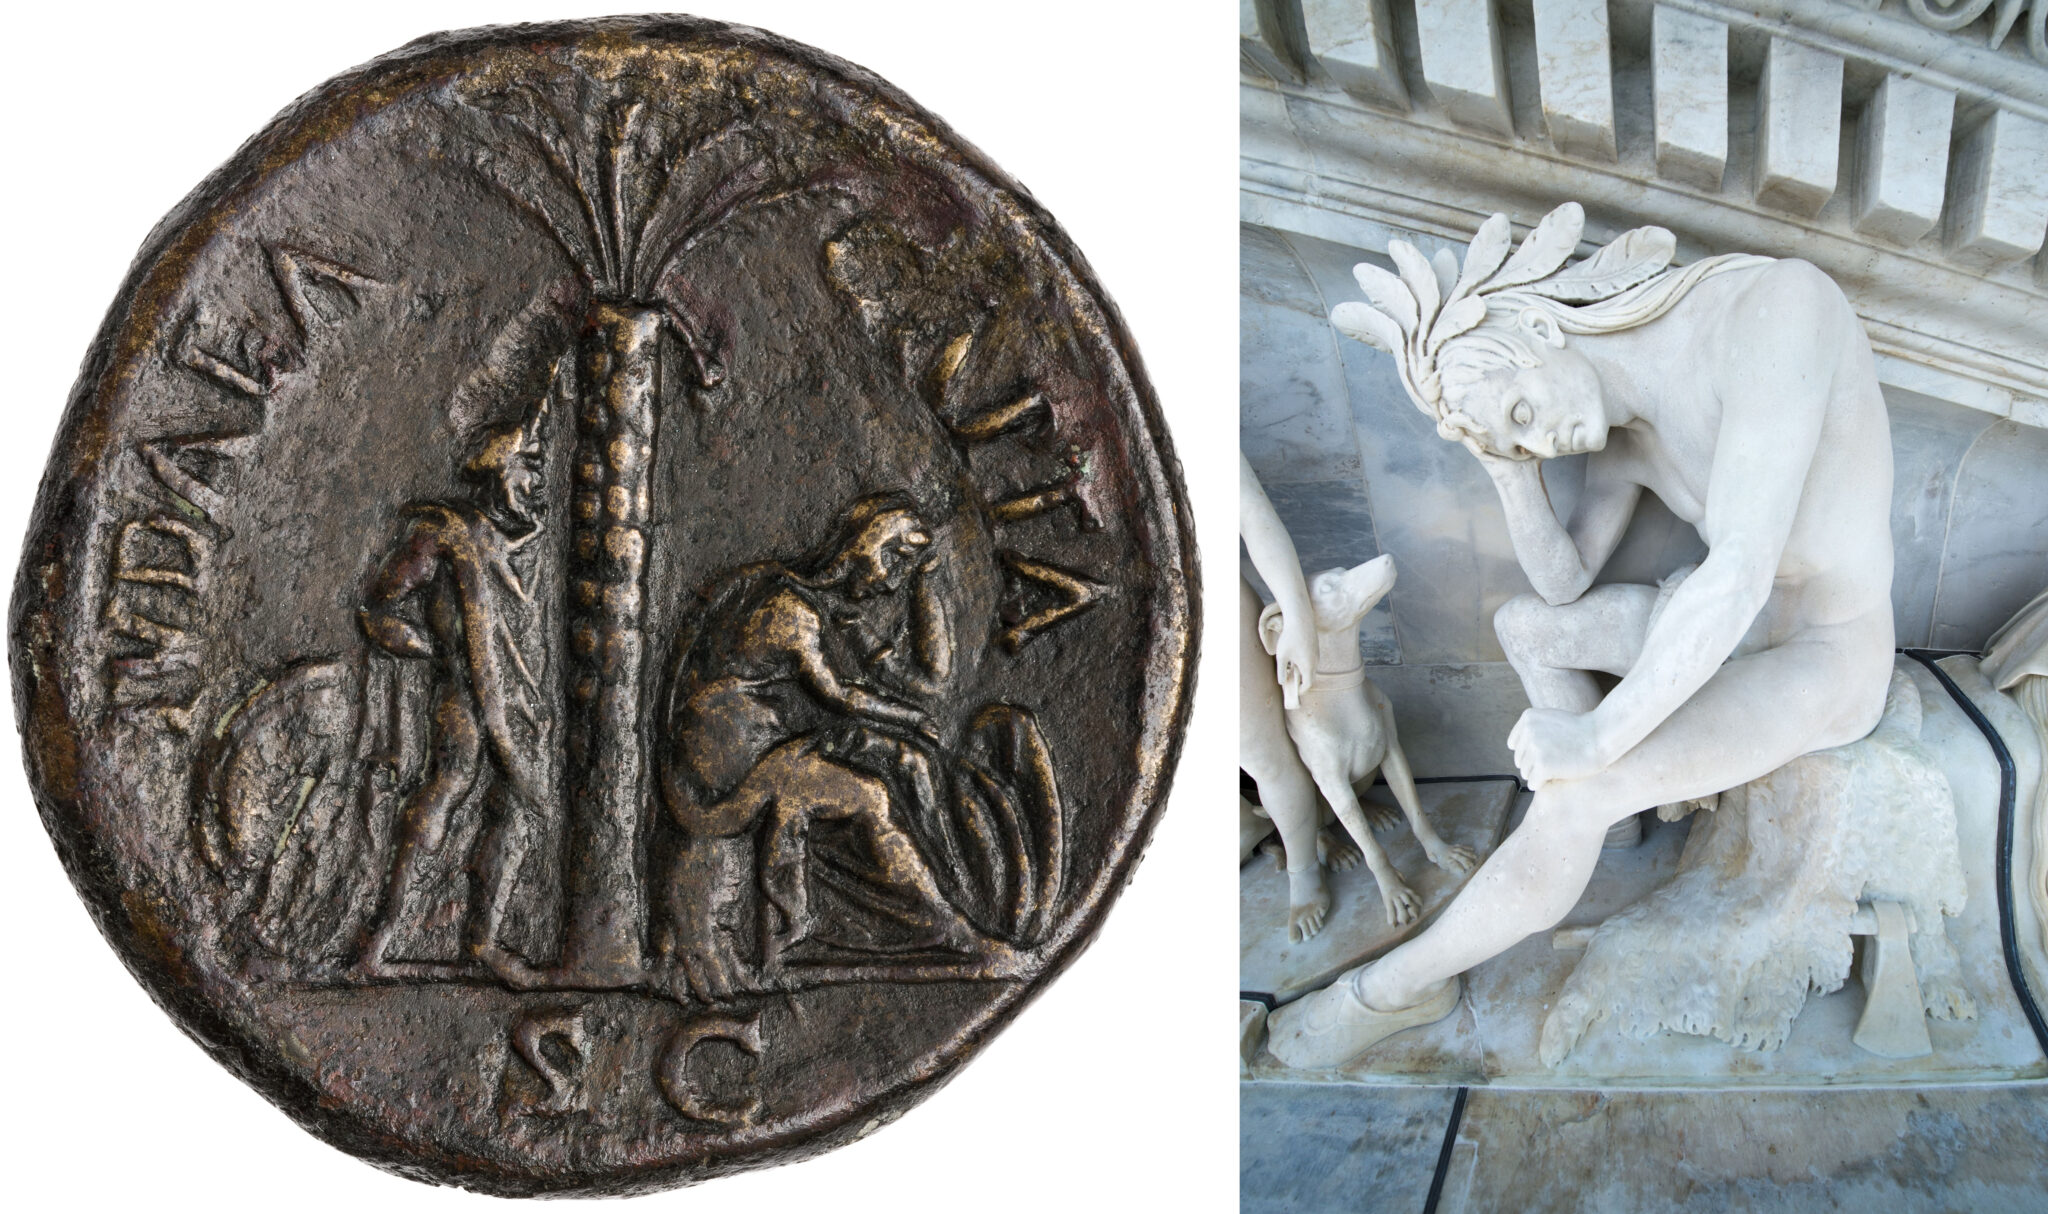 Left, Detail, Indian Chief, “Progress of Civilization,” 1863, Thomas Crawford. Senate Wing, US Capitol, Washington, DC. Courtesy of the Architect of the Capitol. Right, Reverse, Bronze Sestertius of Vespasian, Rome, AD 71, 1947.2.430. American Numismatic Society.